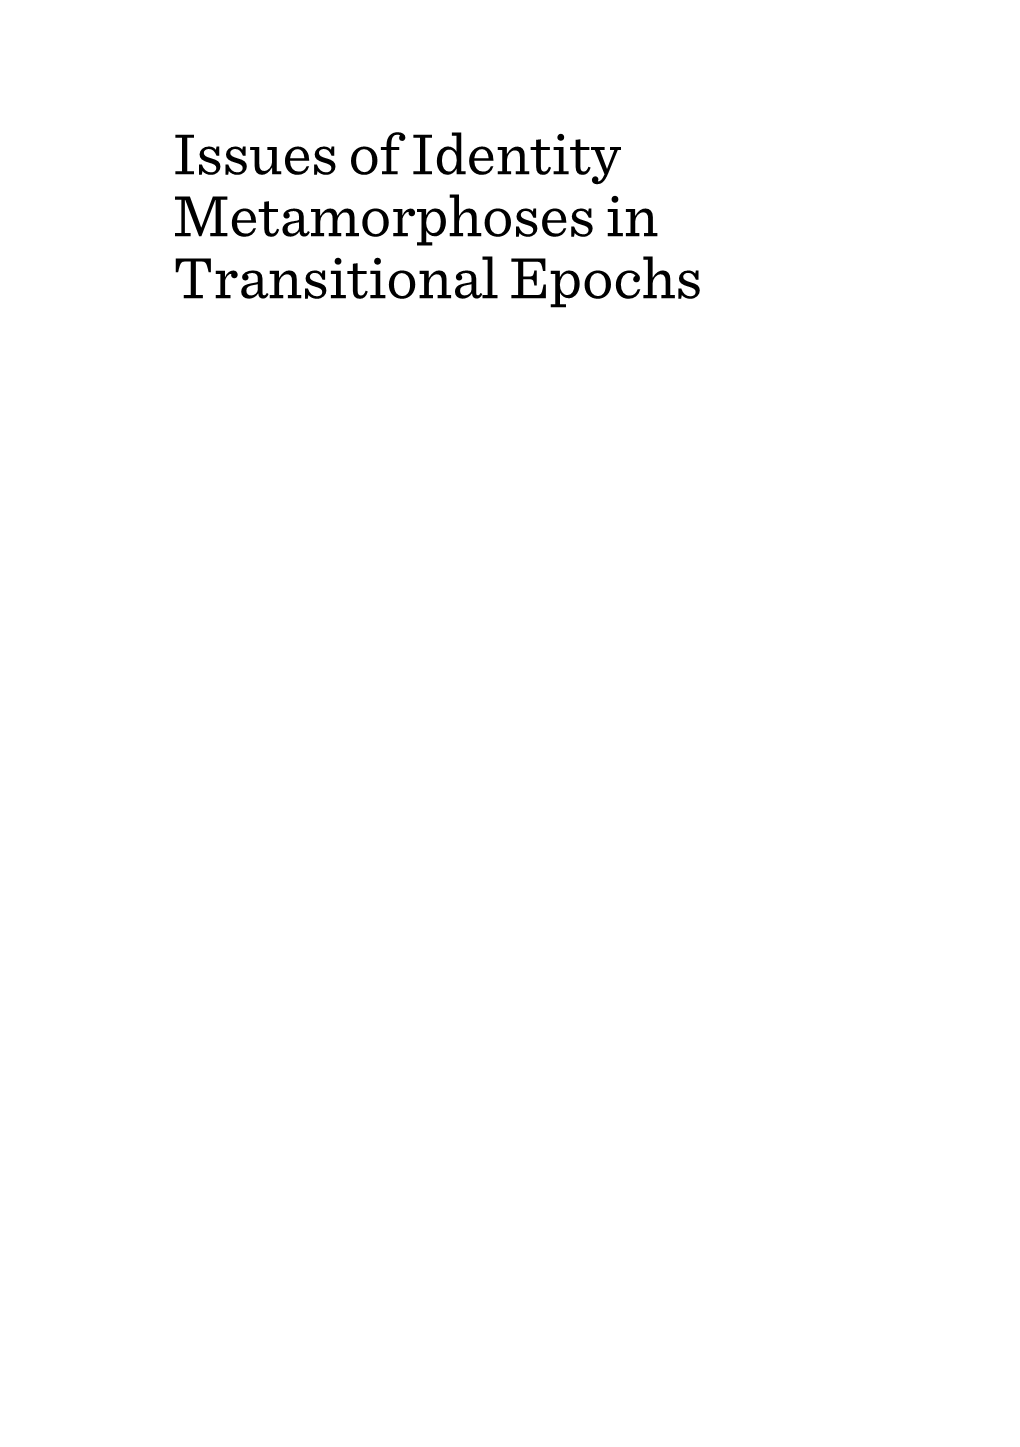 Issues of Identity Metamorphoses in Transitional Epochs